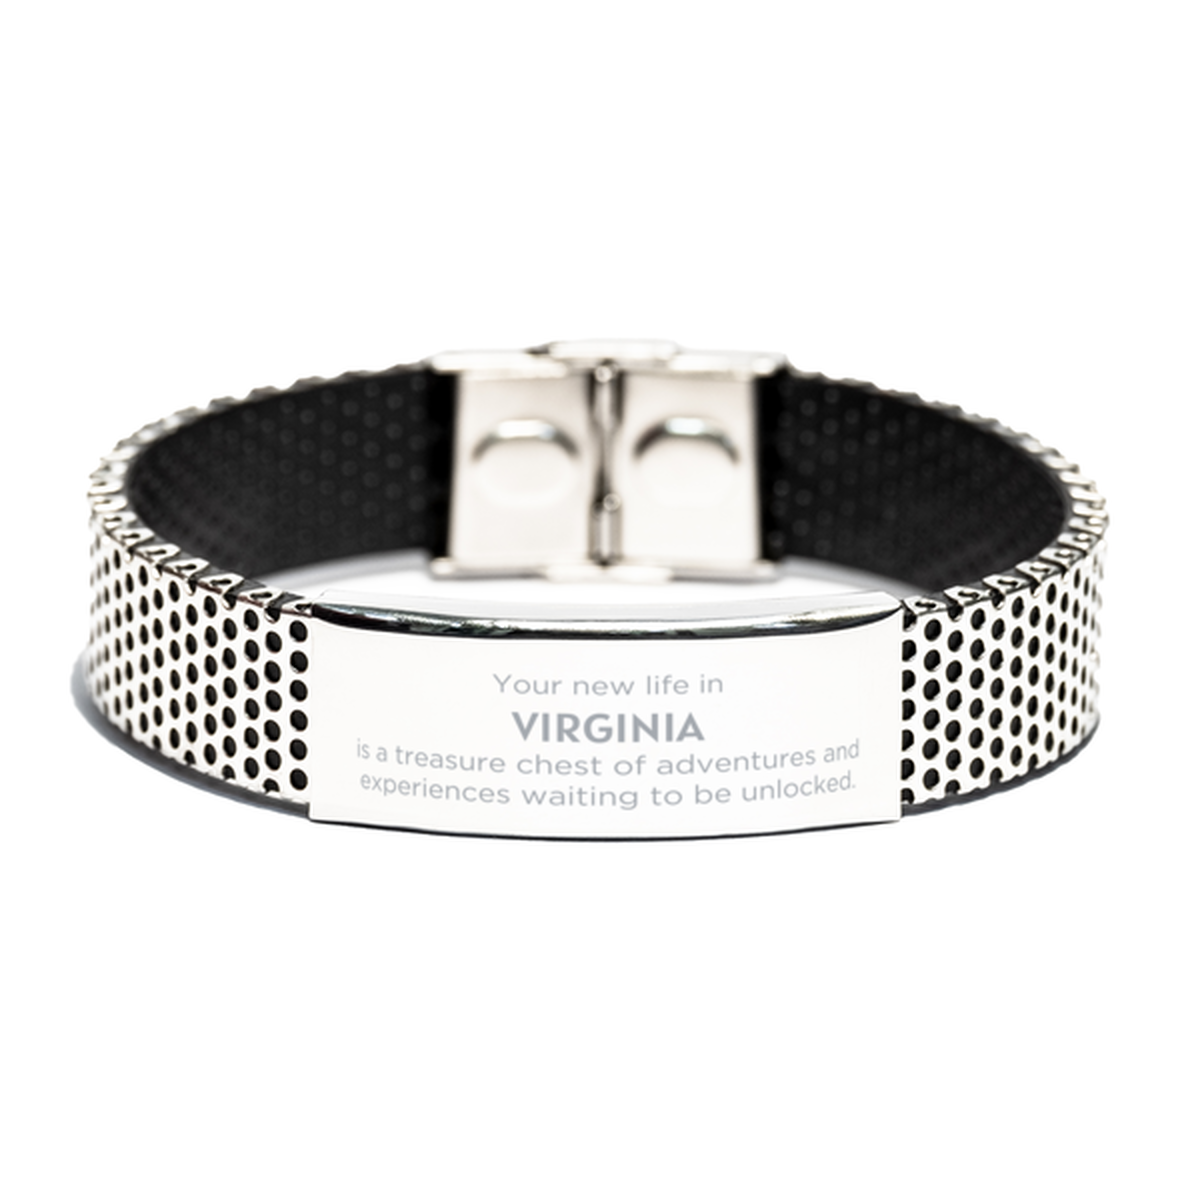 Moving to Virginia Gifts, Your new life in Virginia, Long Distance Virginia Christmas Stainless Steel Bracelet For Men, Women, Friends, Coworkers